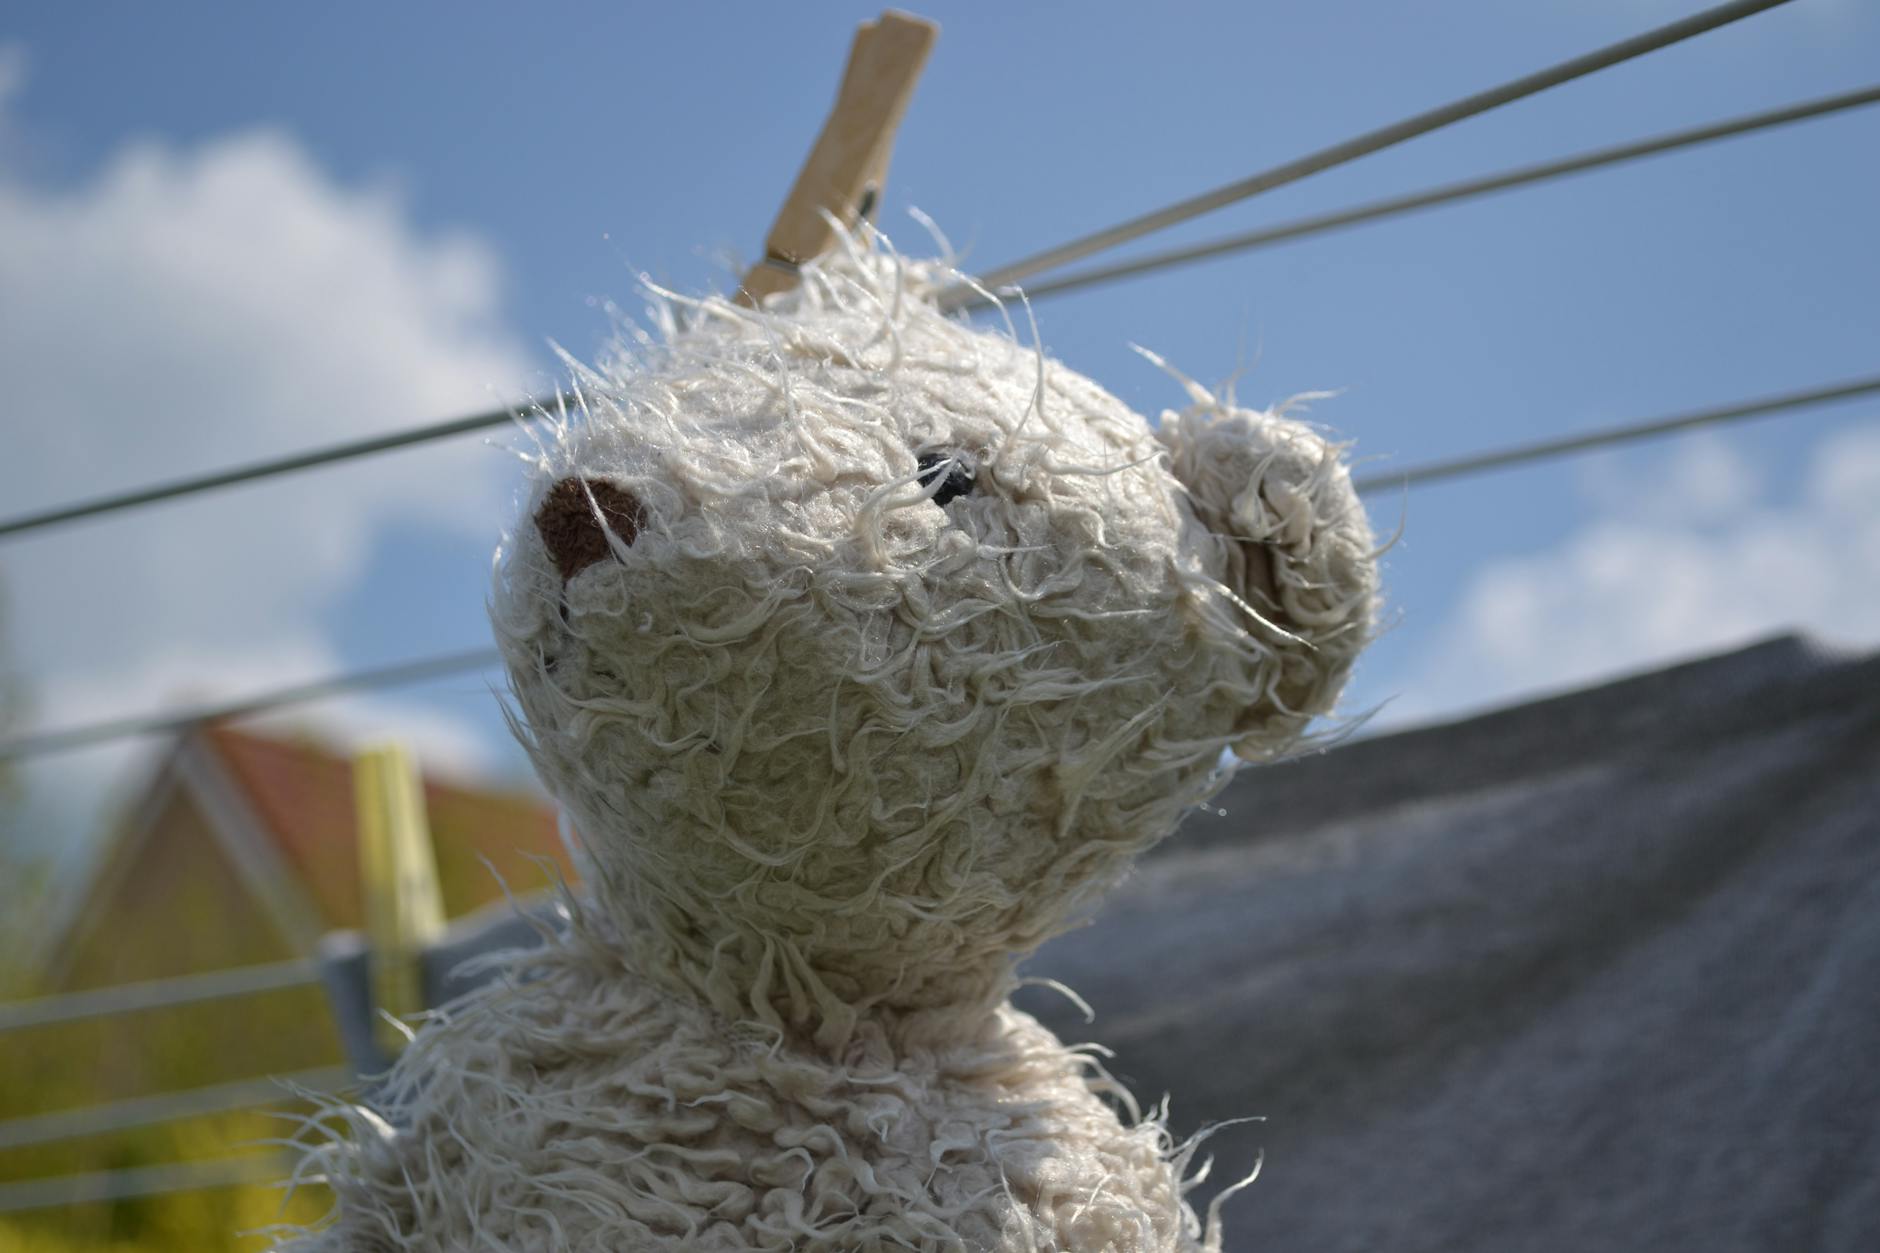 A sad looking teddy bear is drying alone on a clothesline.
He seems to have been oppressed for some time. Or maybe he has given an unlimited amount of hugs, which makes him "used".